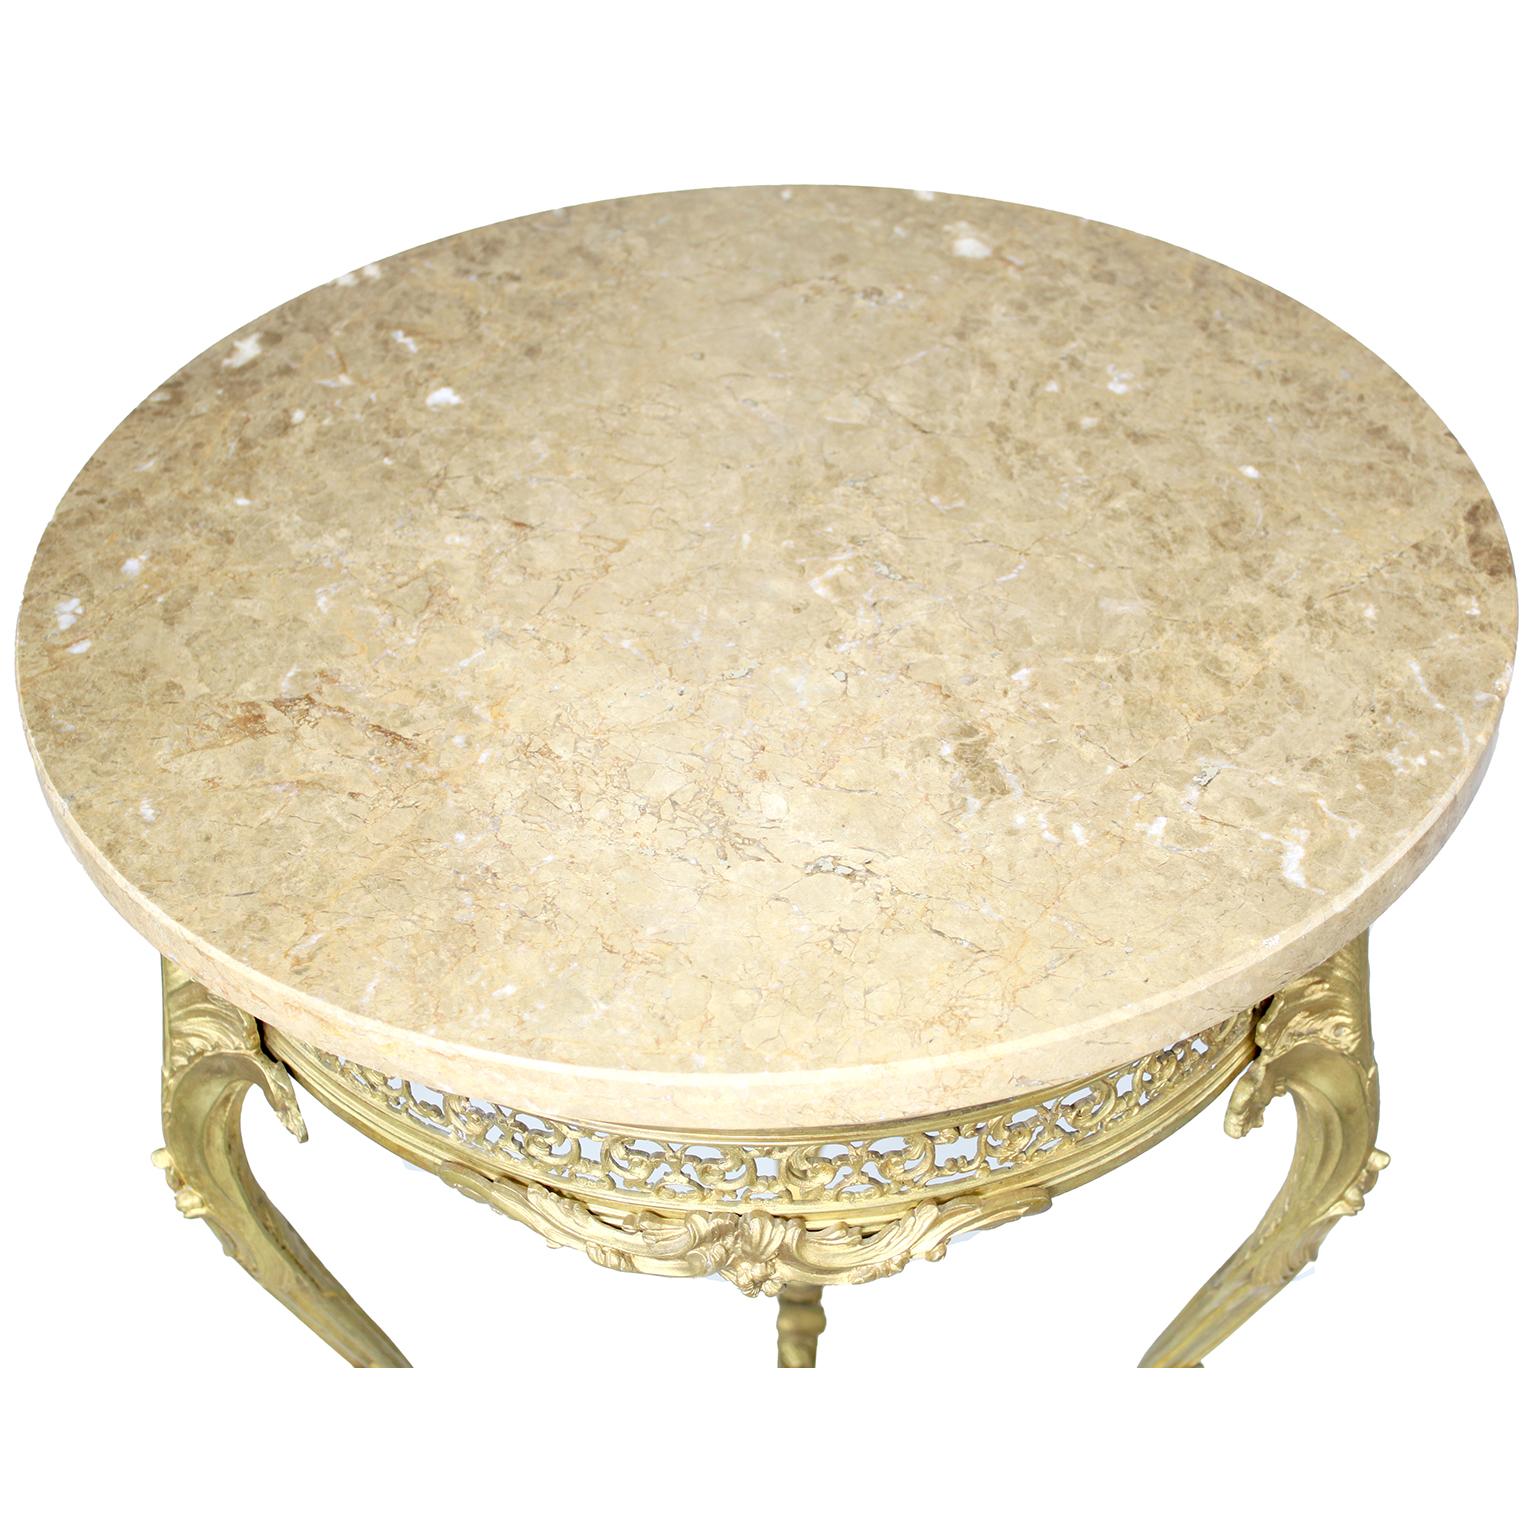 A French Belle Époque Louis XV Style Gilt-Bronze Gueridon Table with Marble Top For Sale 3